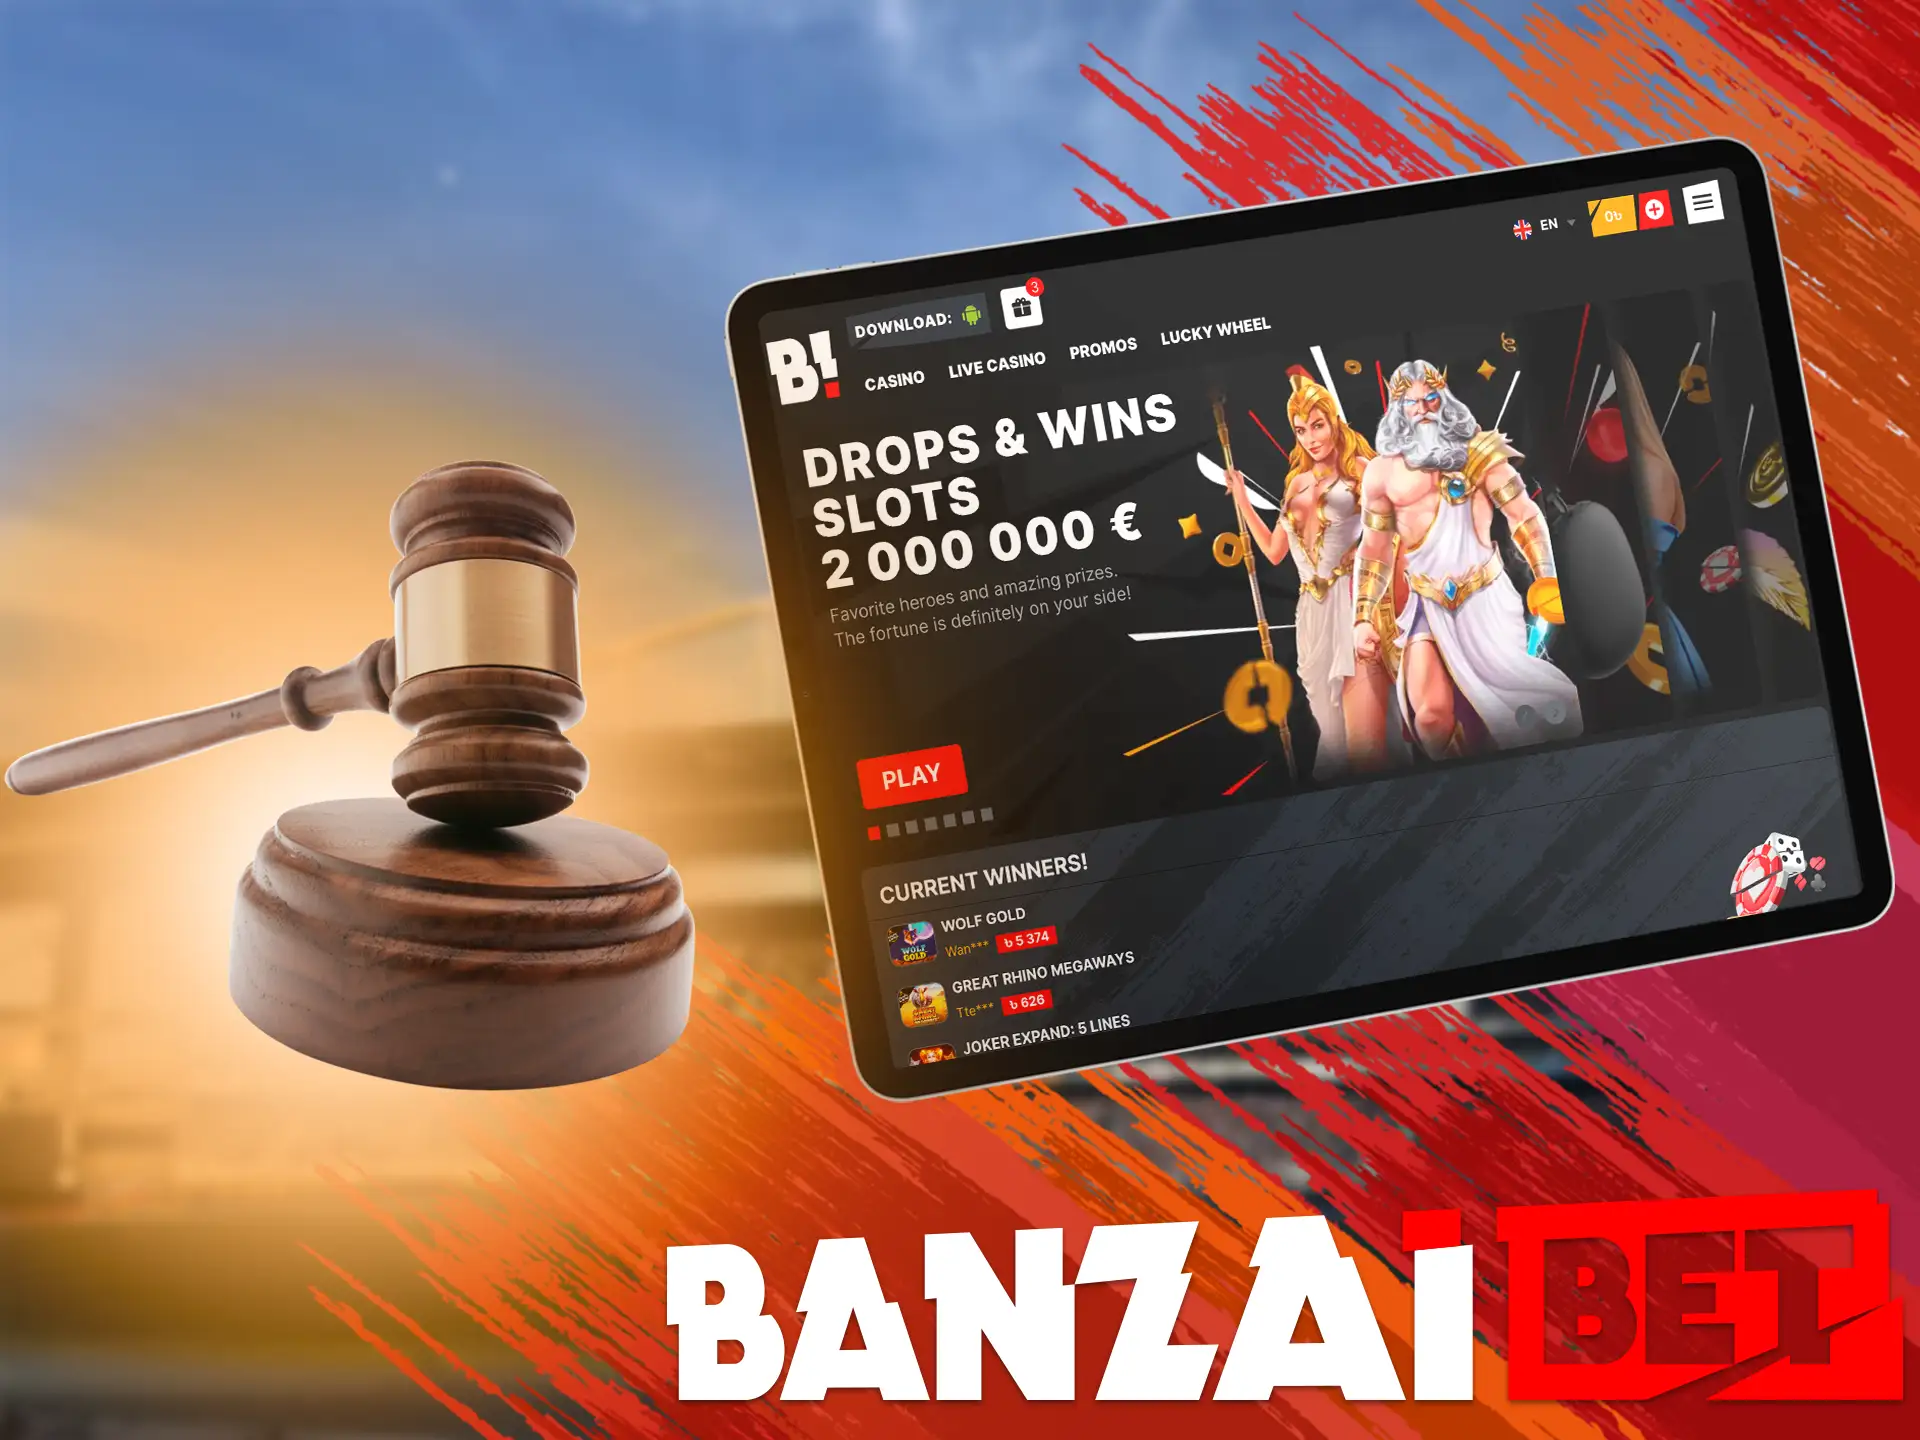 Banzai Bet is a world renowned bookmaker operating legally, licensed by the Curacao E-Gaming Commission.